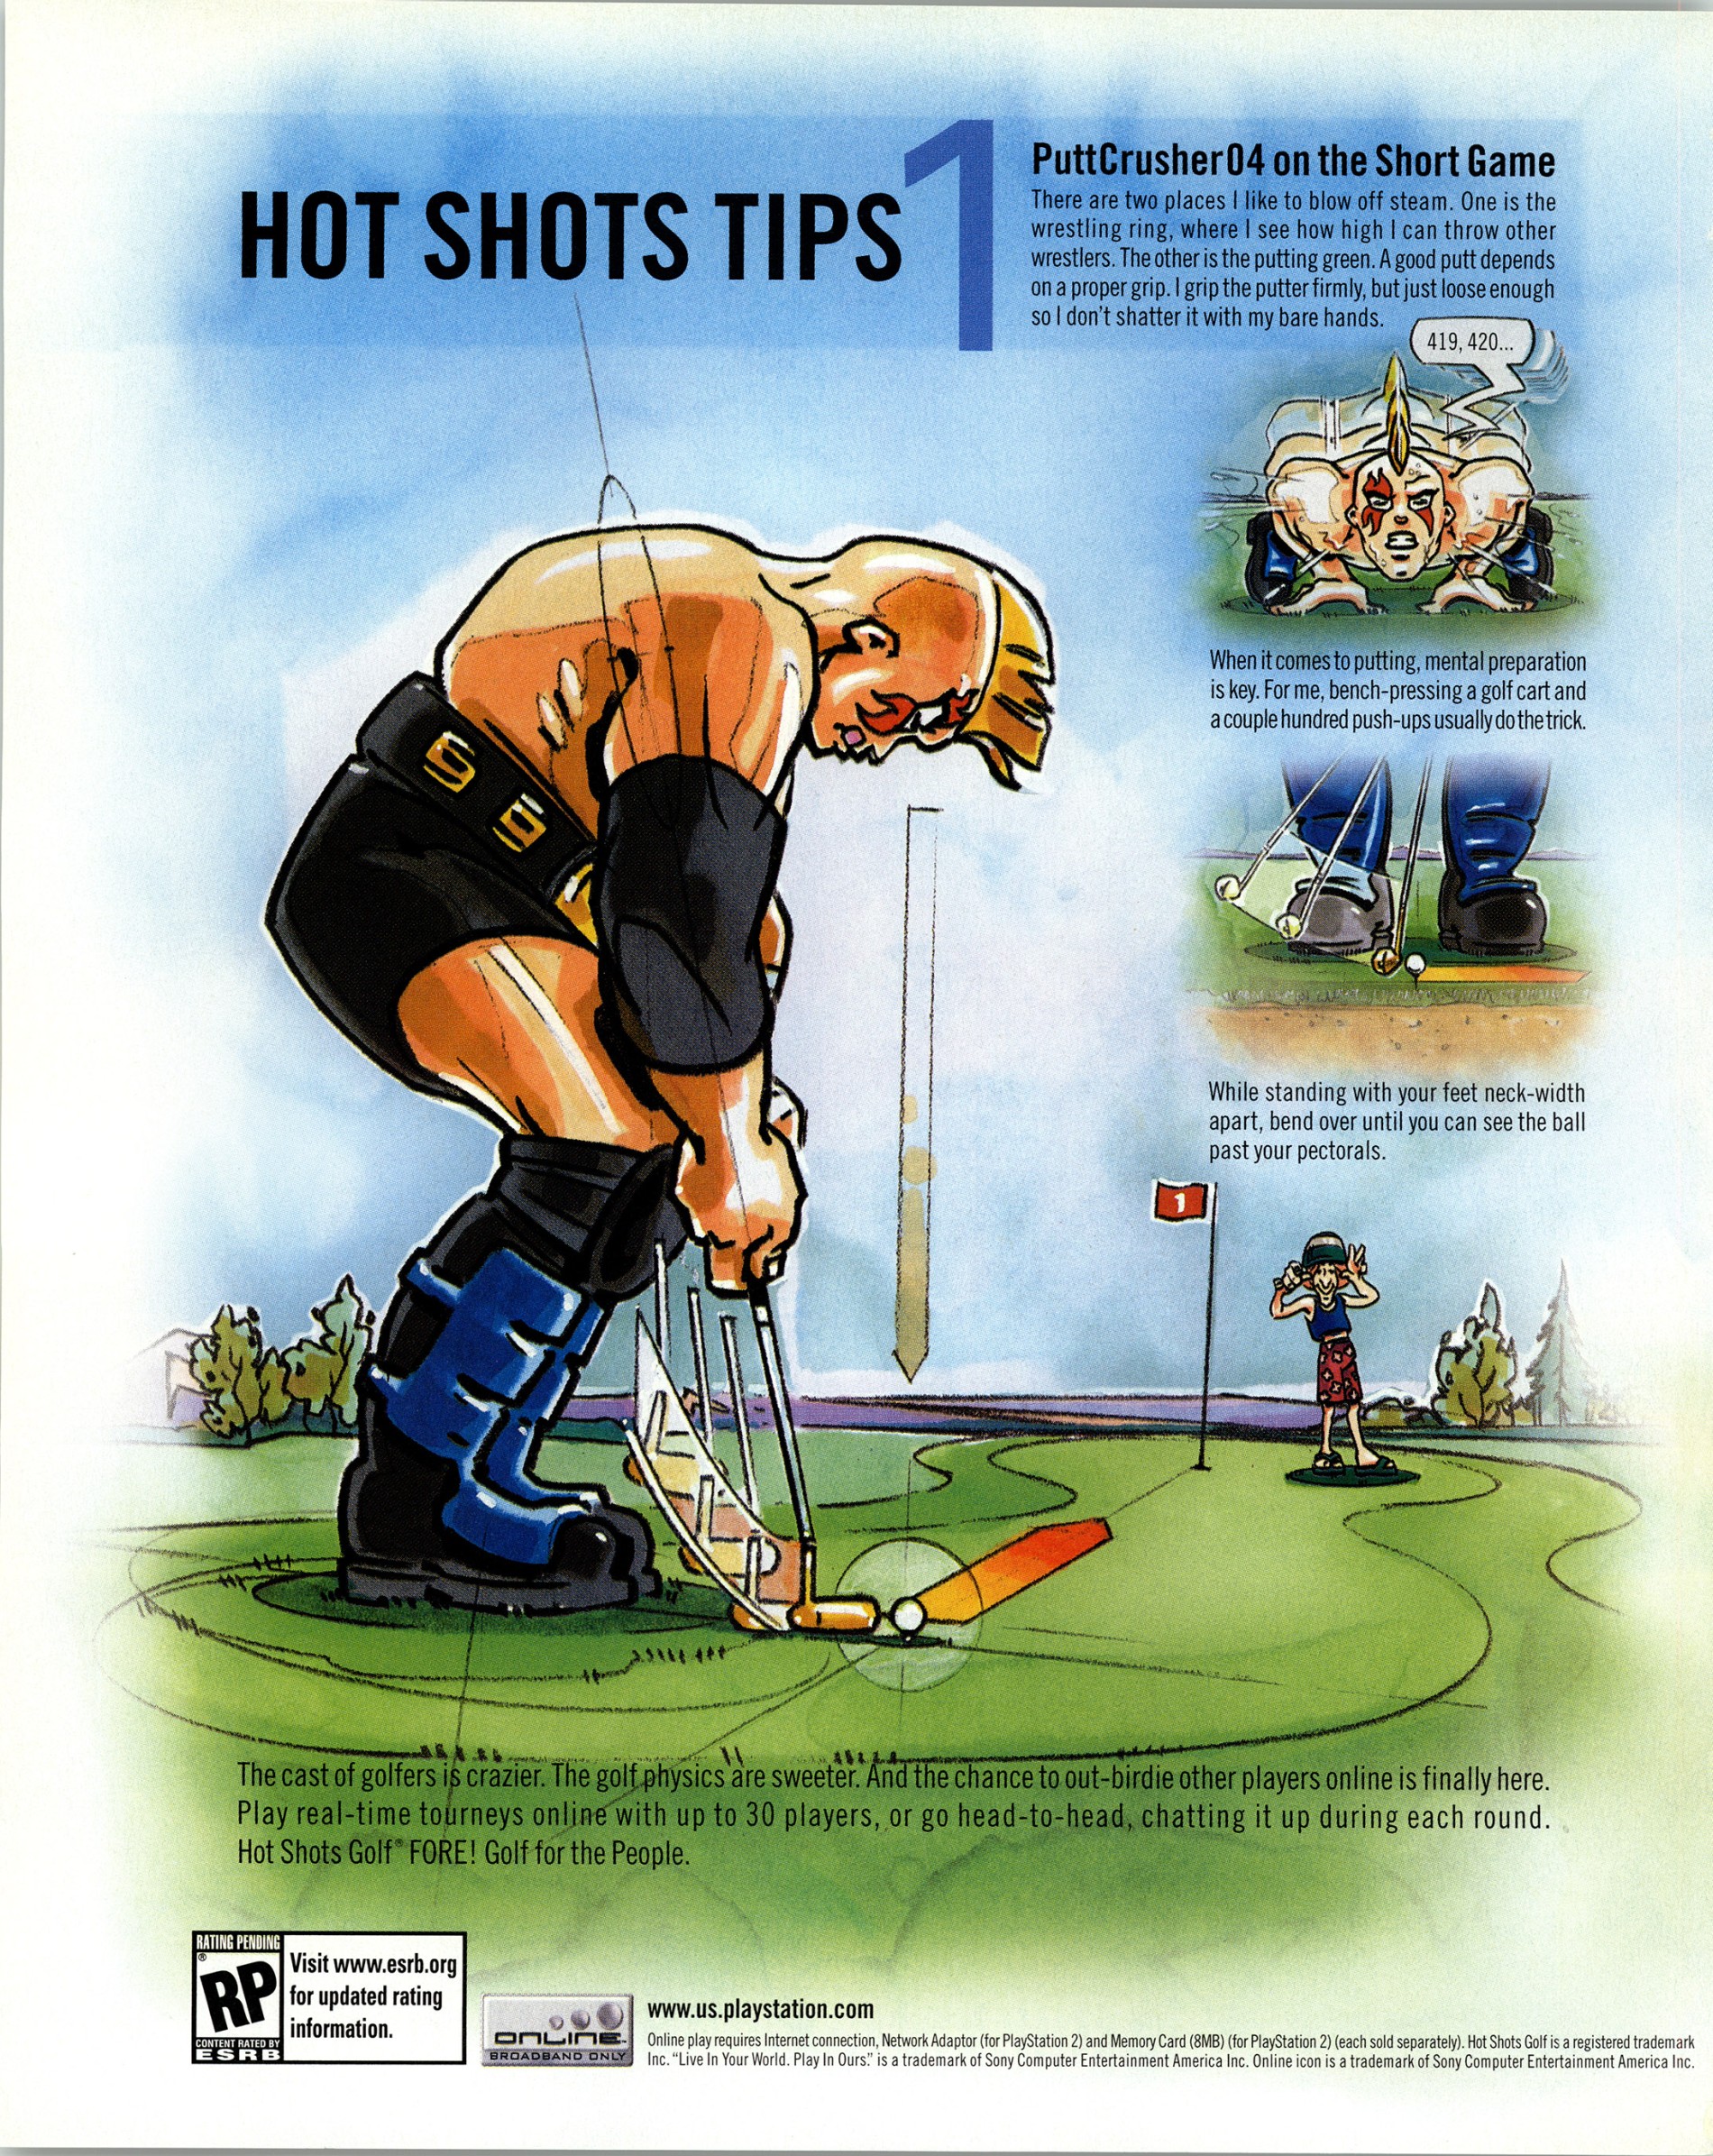 hot shots golf fore h and l